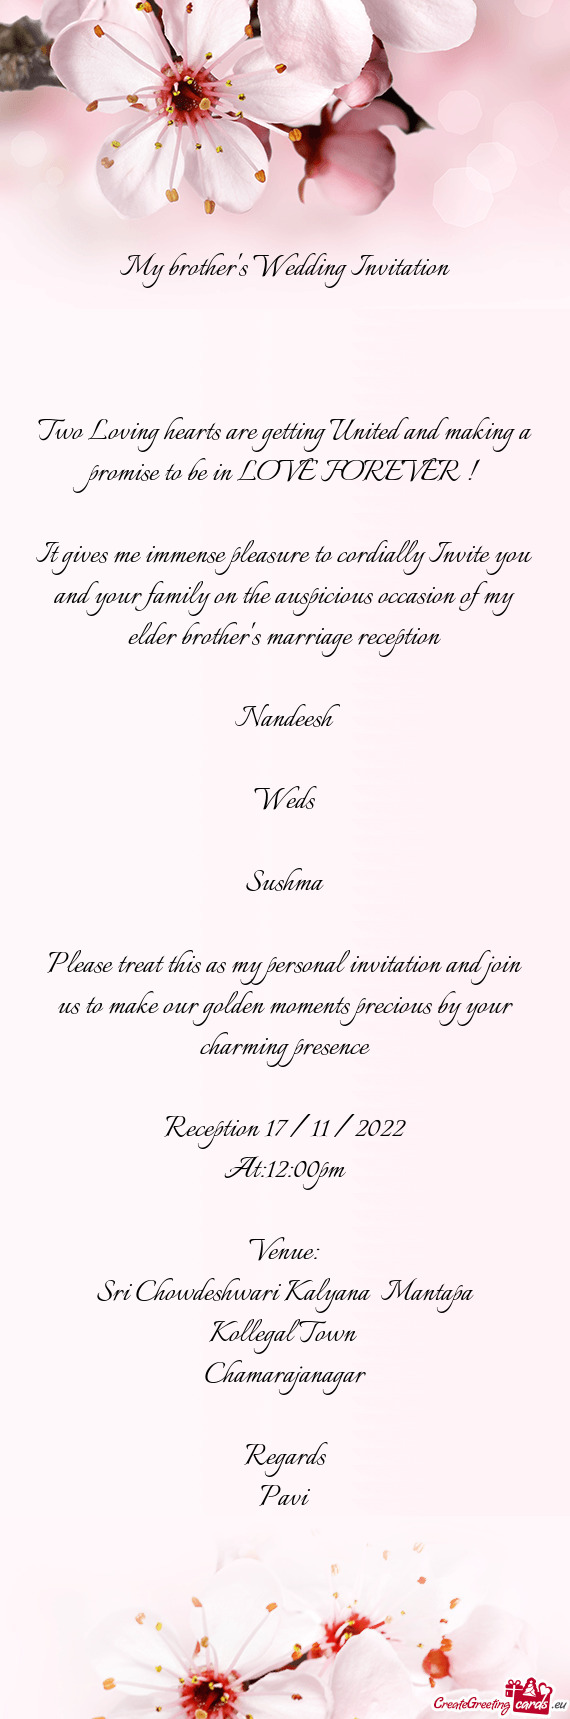 Be in LOVE FOREVER !  It gives me immense pleasure to cordially Invite you and your family on the